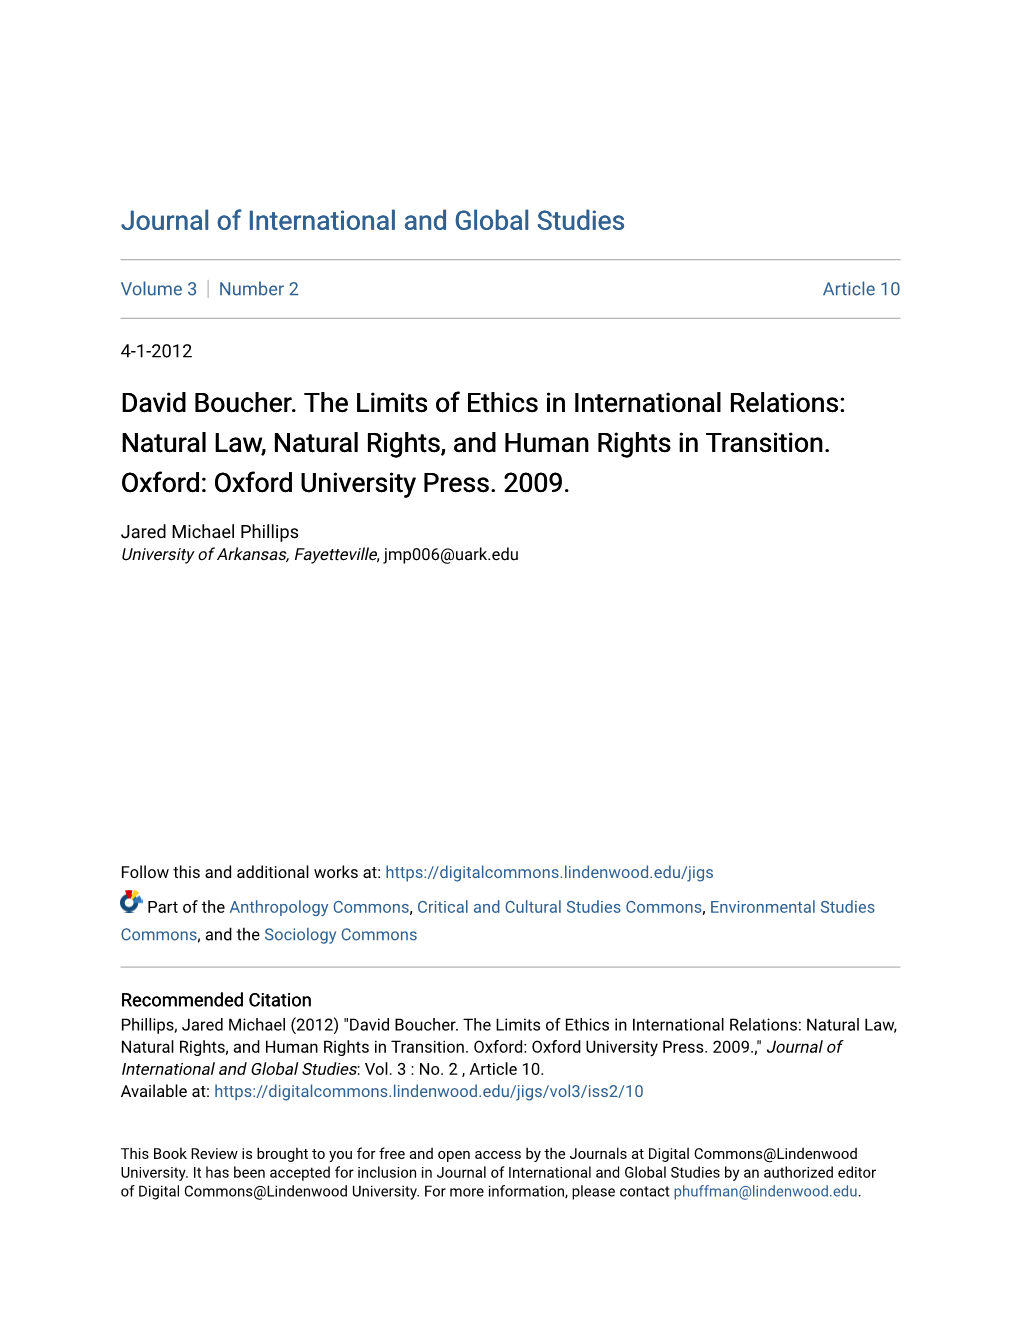 David Boucher. the Limits of Ethics in International Relations: Natural Law, Natural Rights, and Human Rights in Transition